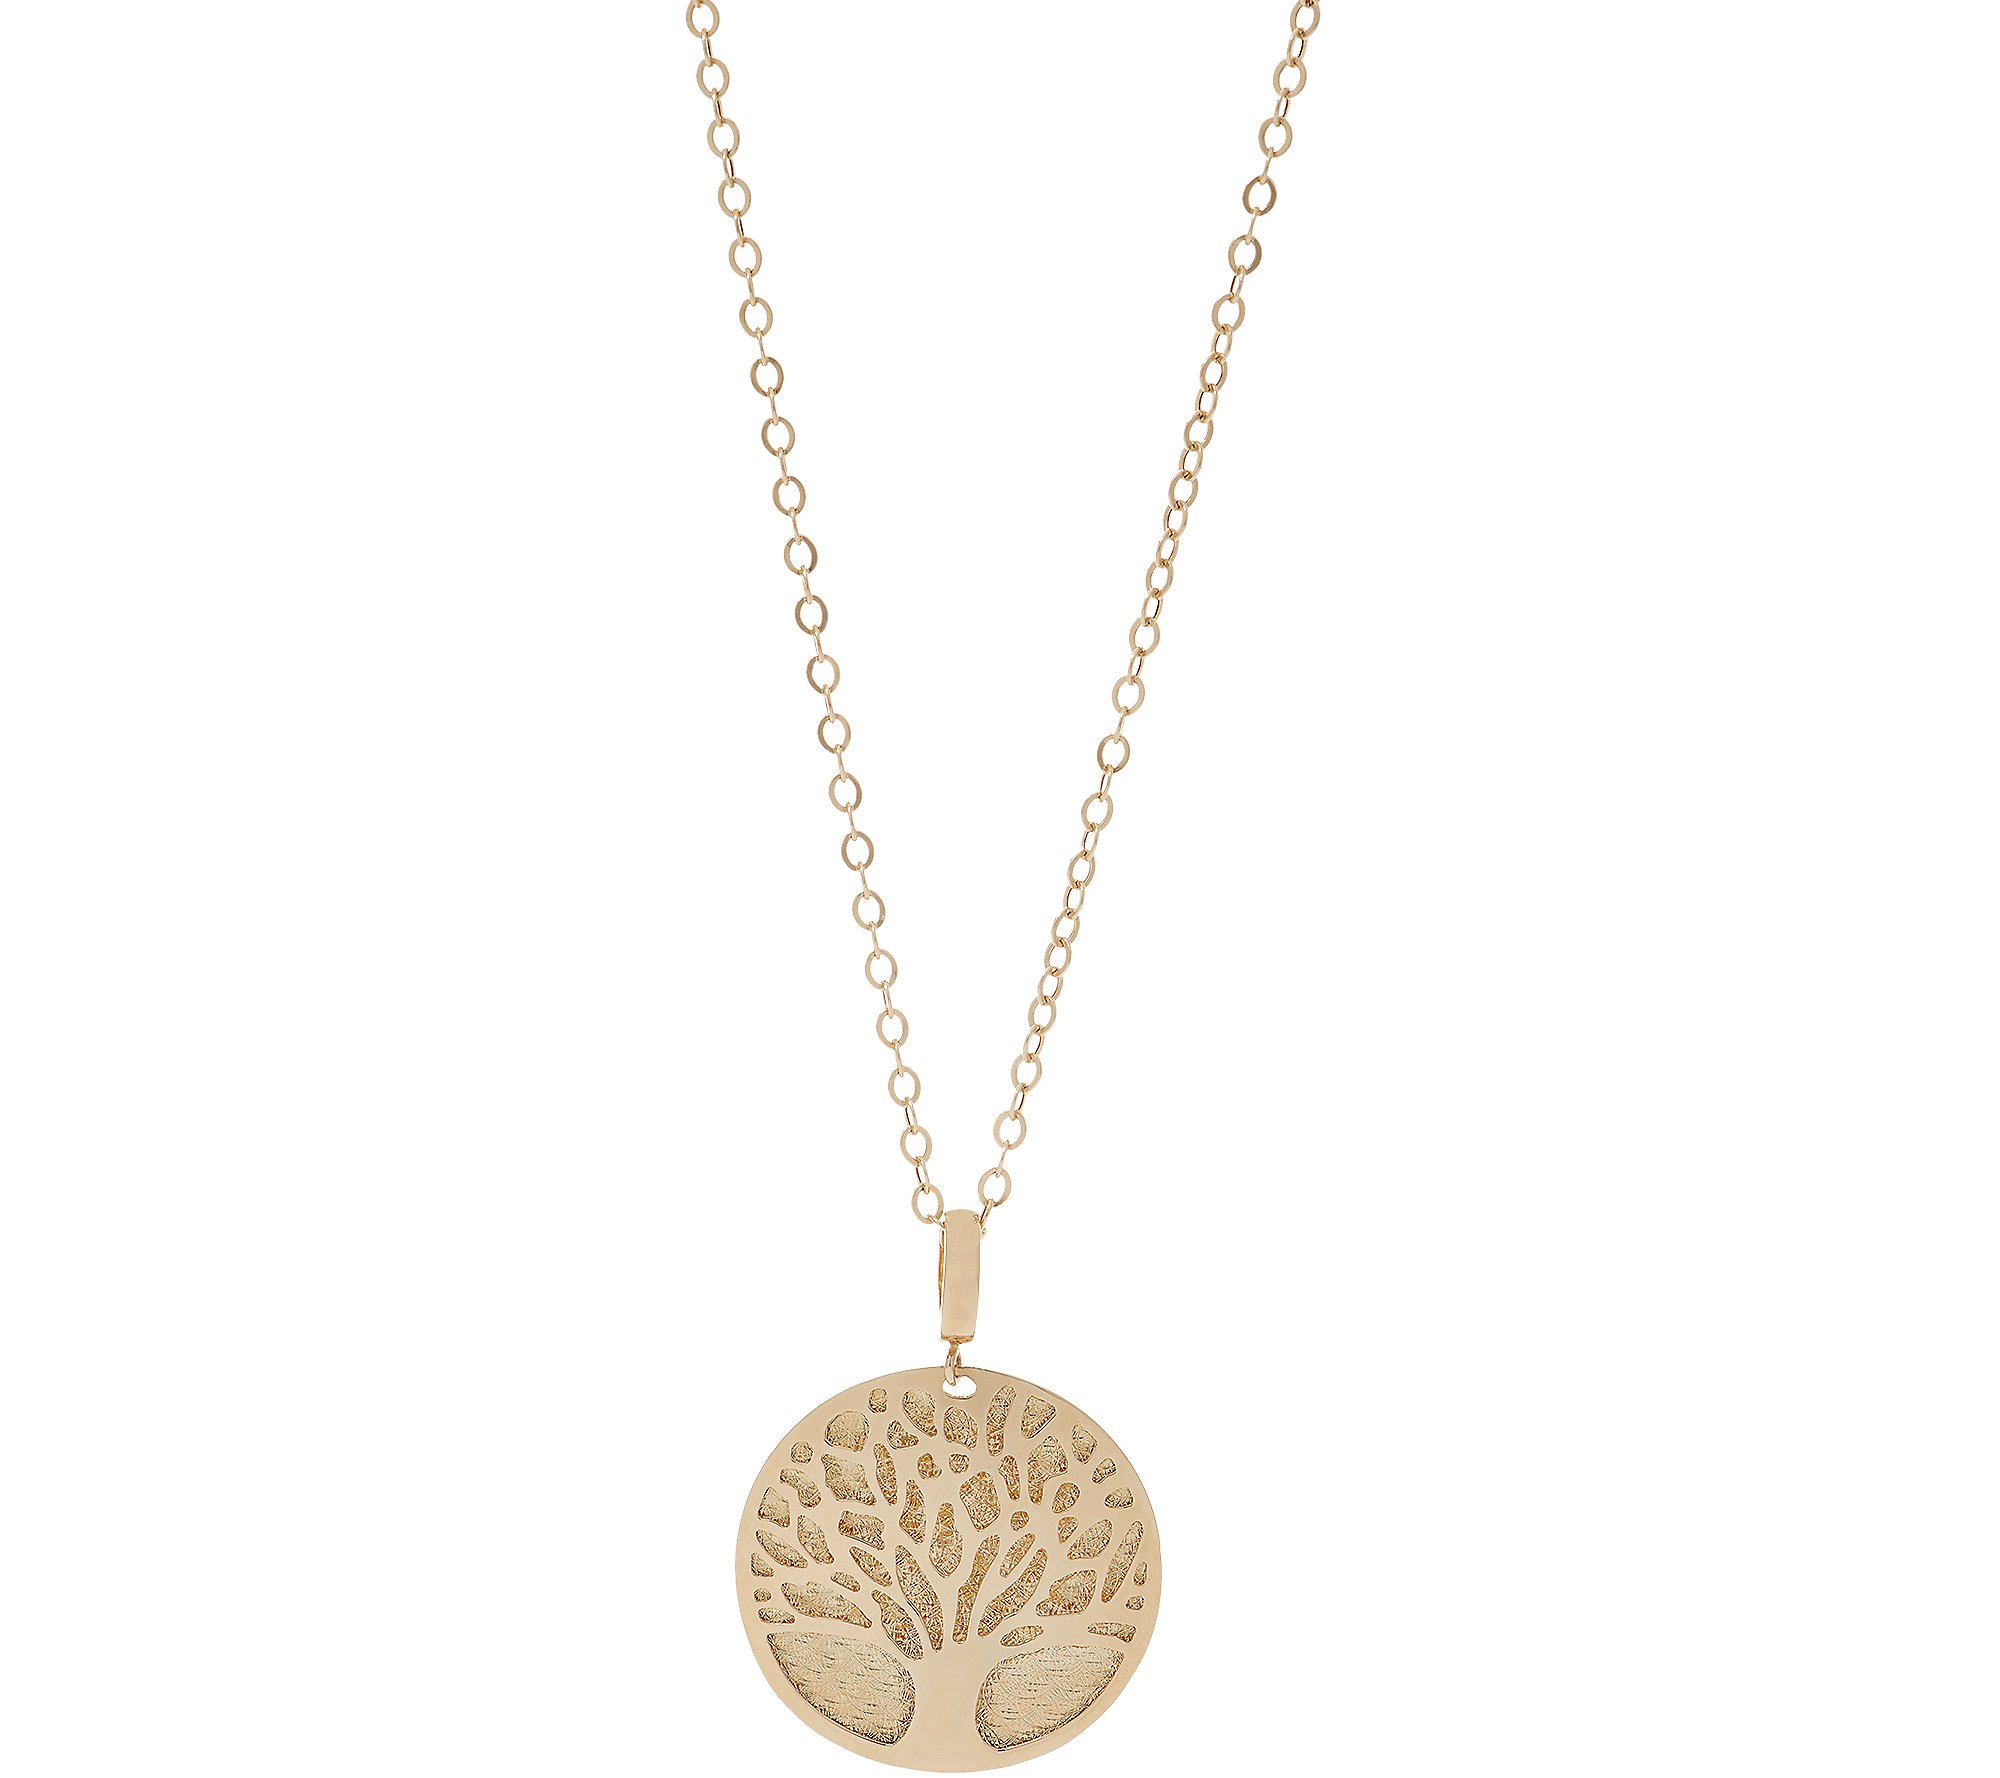 piece,small charms tree charm gold branch leaf Pendant, 1 Gold vermeil branch Pendant 22 \u00d7 12 mm Moroccan style 14k GOLD Satin finish